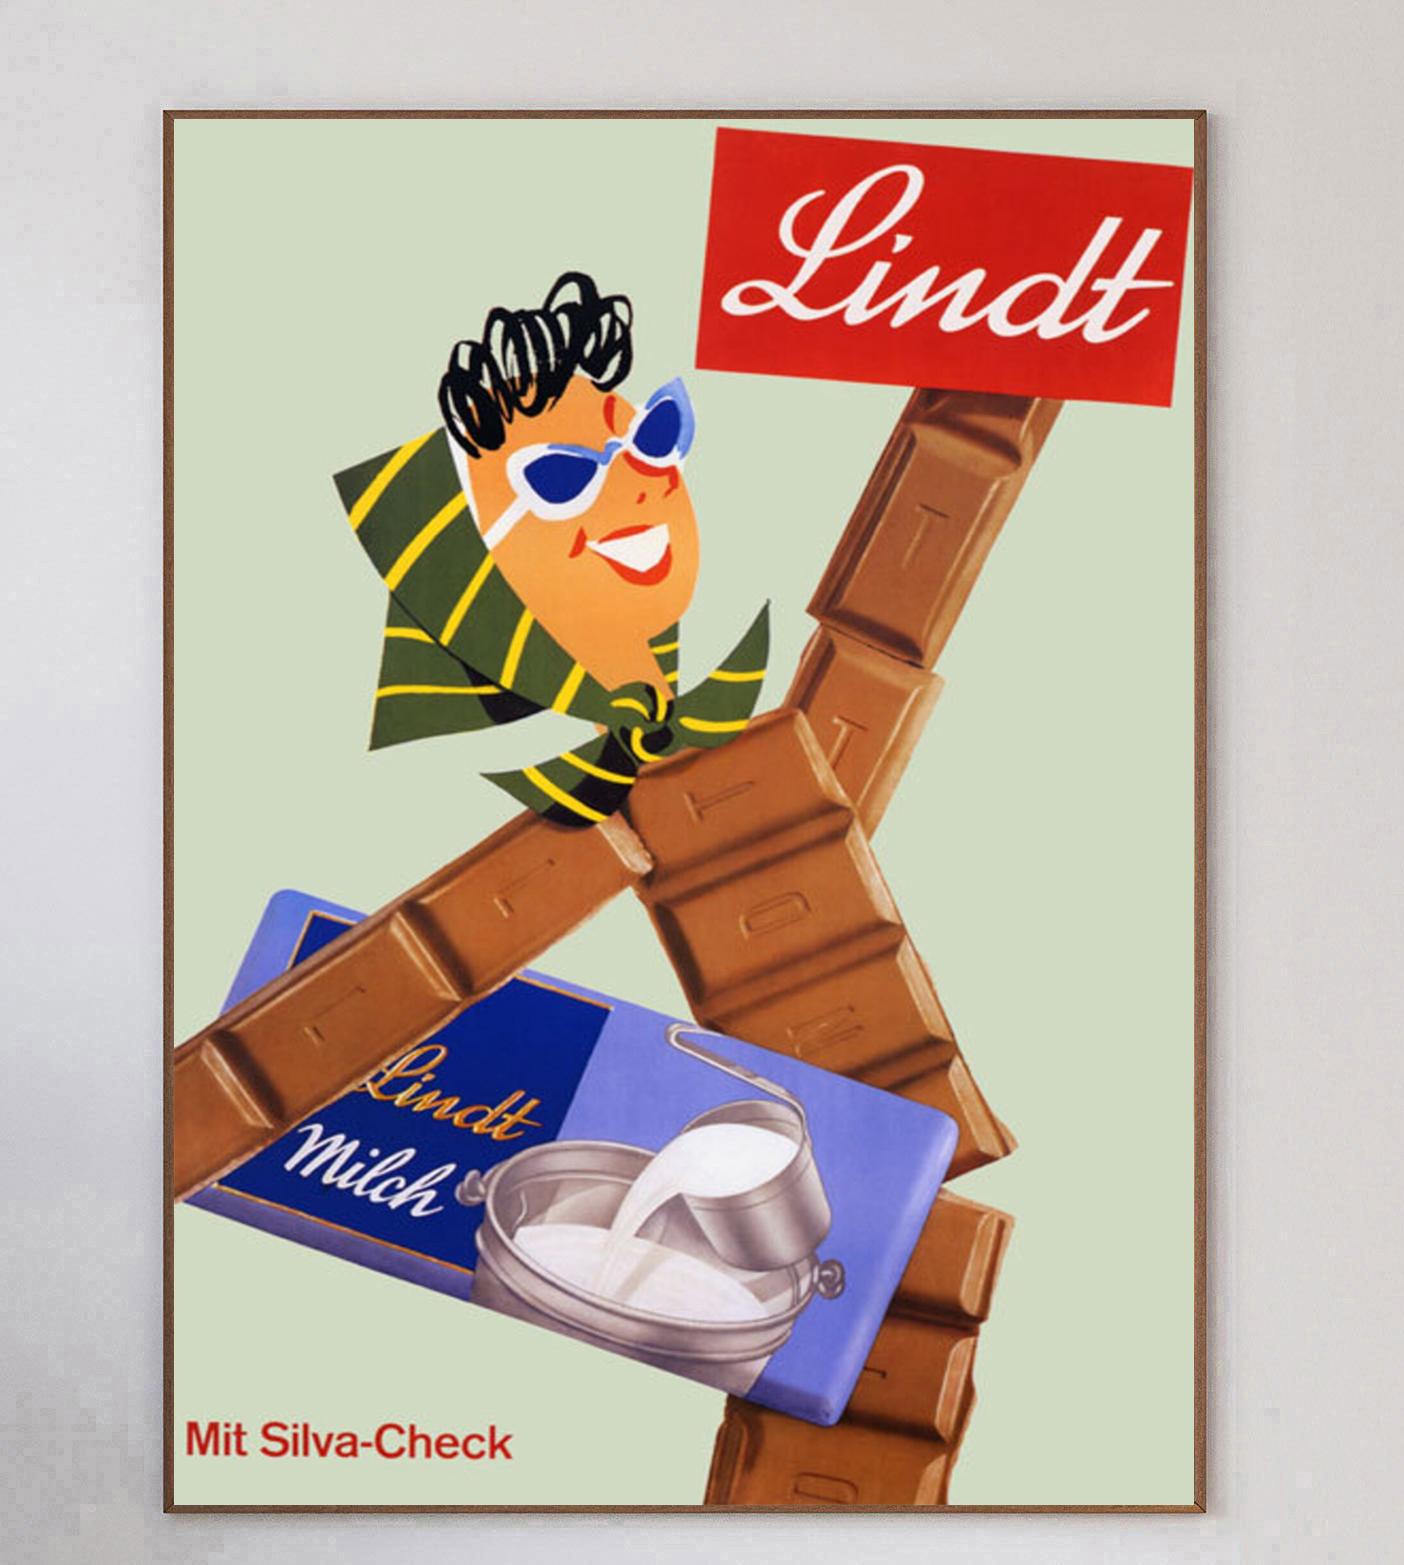 Founded in 1845, Lindt has gone on to become one fo the largest chocolatiers in the world. The Swiss company is based in Kilchberg where its largest factory and museum is, and it has 11 other factories worldwide.

This gorgeous poster was created